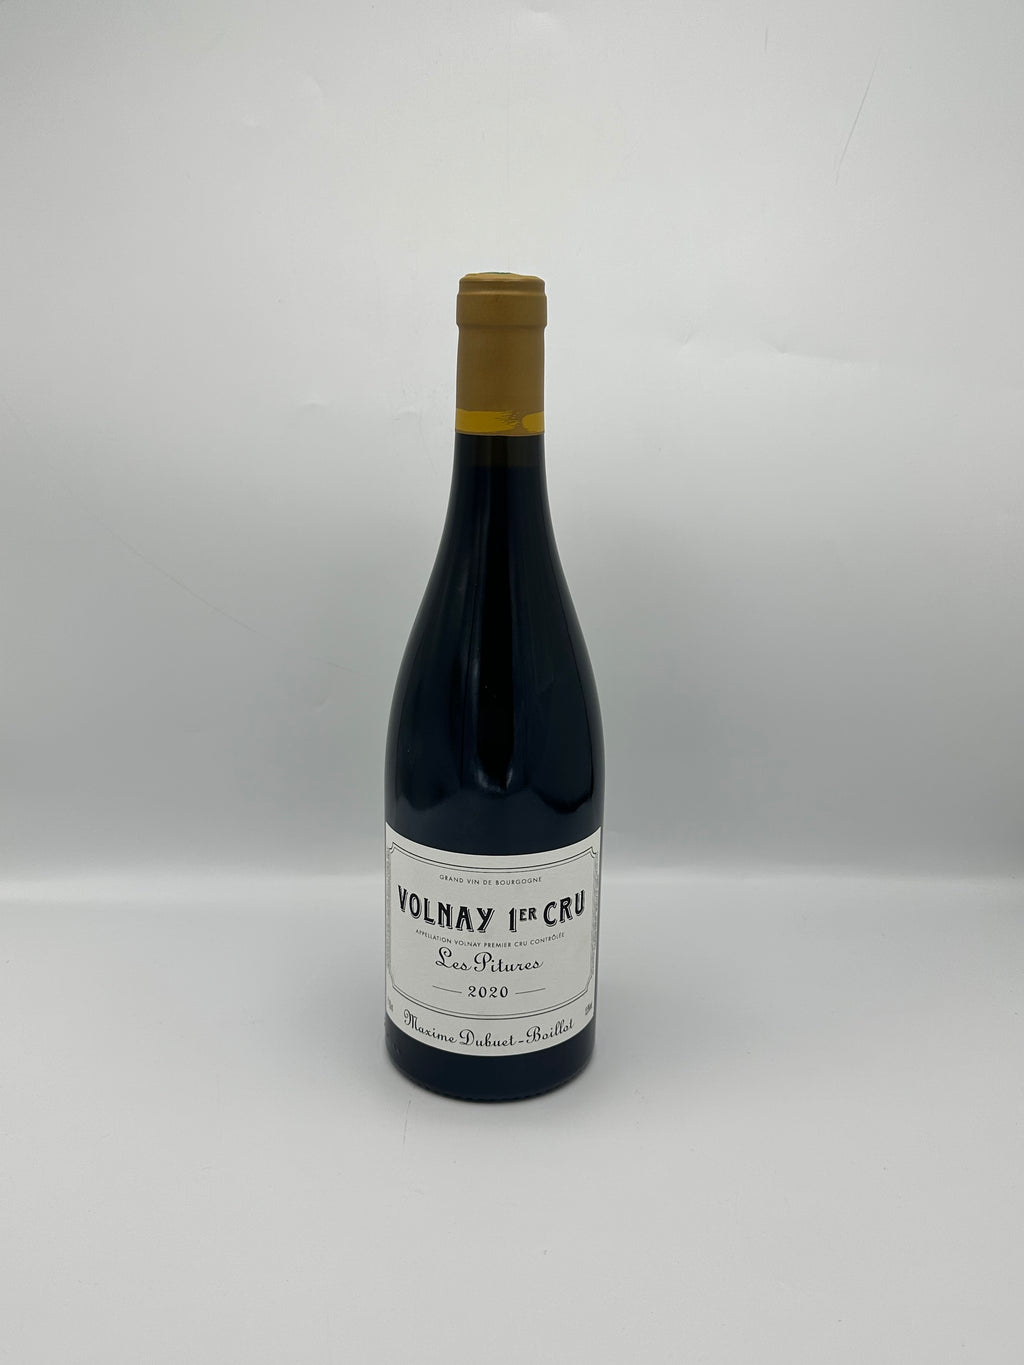 Volnay 1er Cru “Les Pitures” 2020 Red - Maxime Dubuet Boillot 